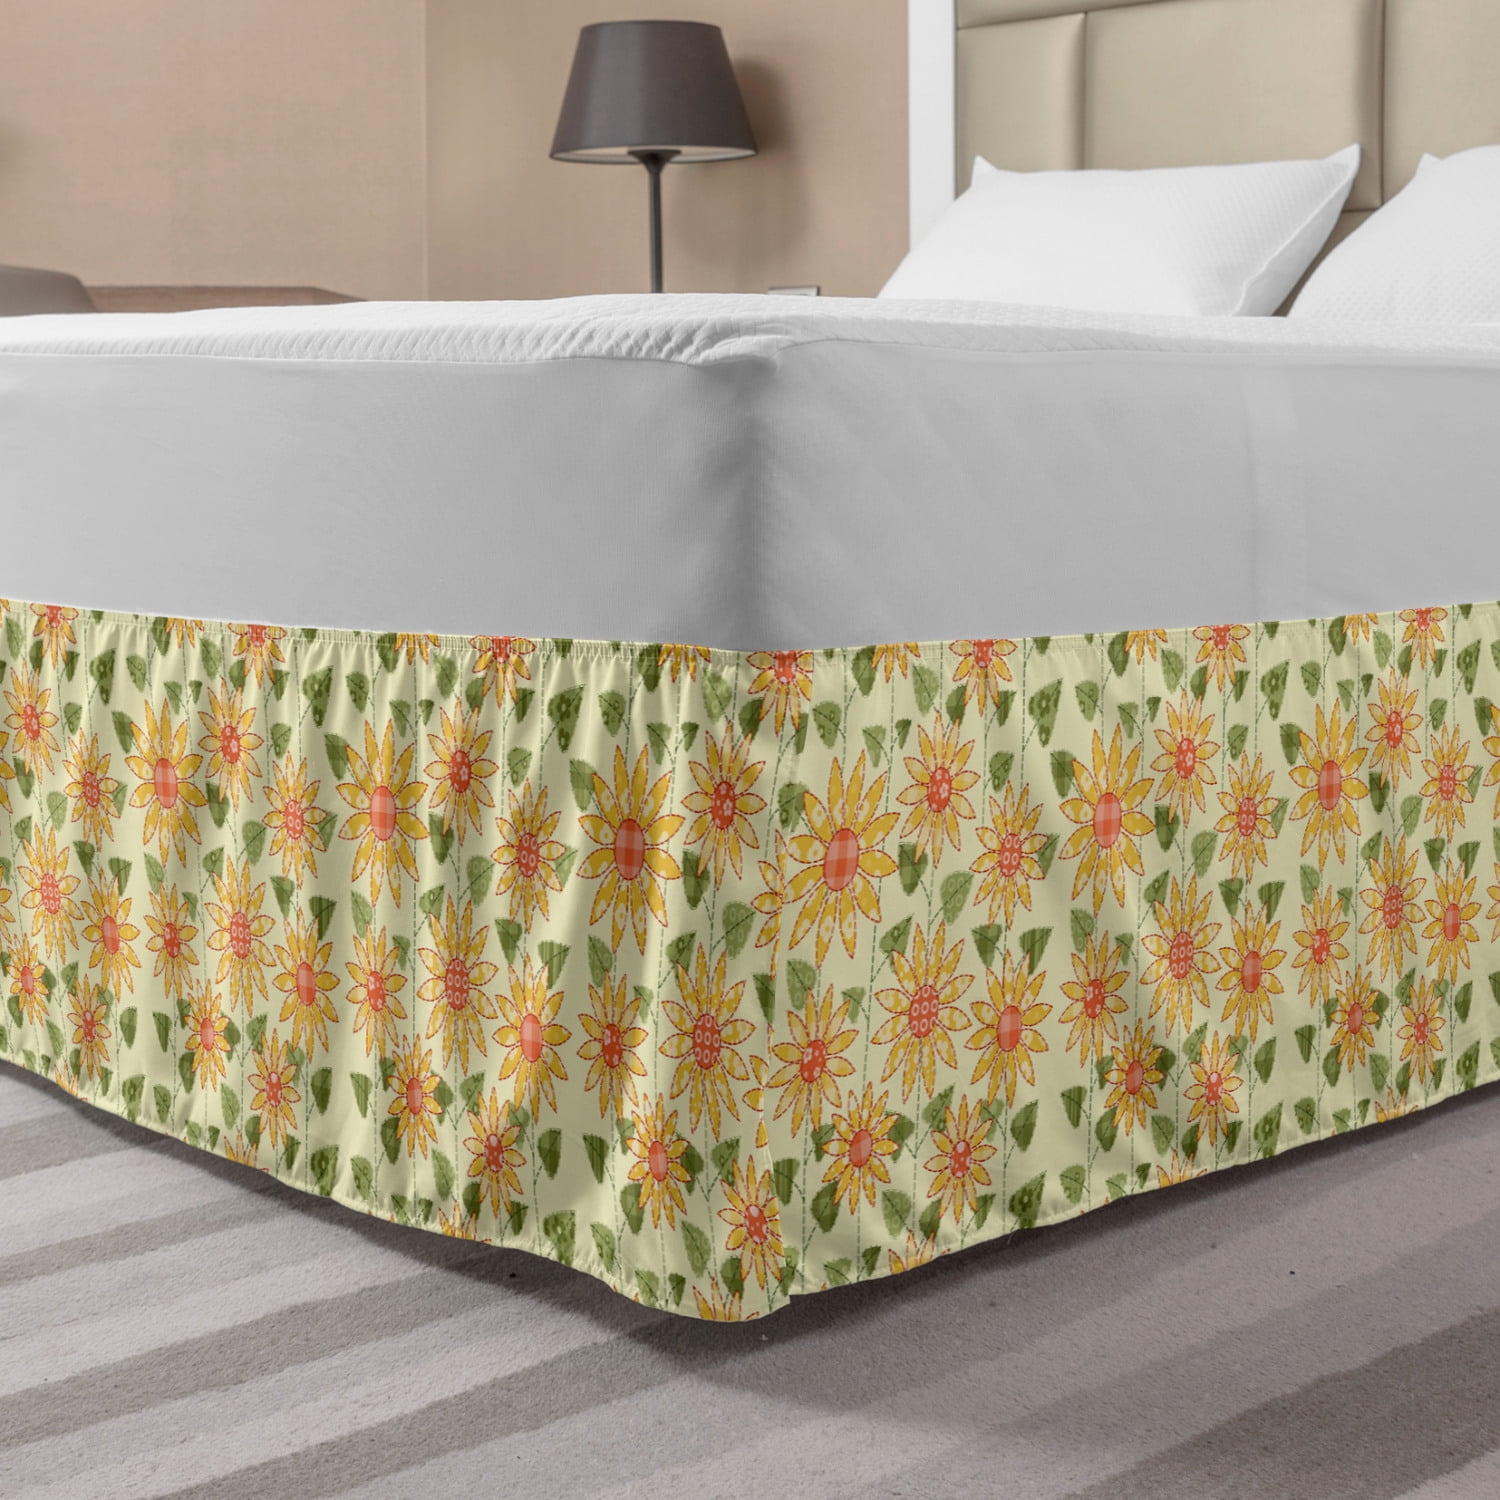 Brushed Cotton Rustic Floral Thick Bed Skirt Full Queen Bedspreads Pillow Cases 